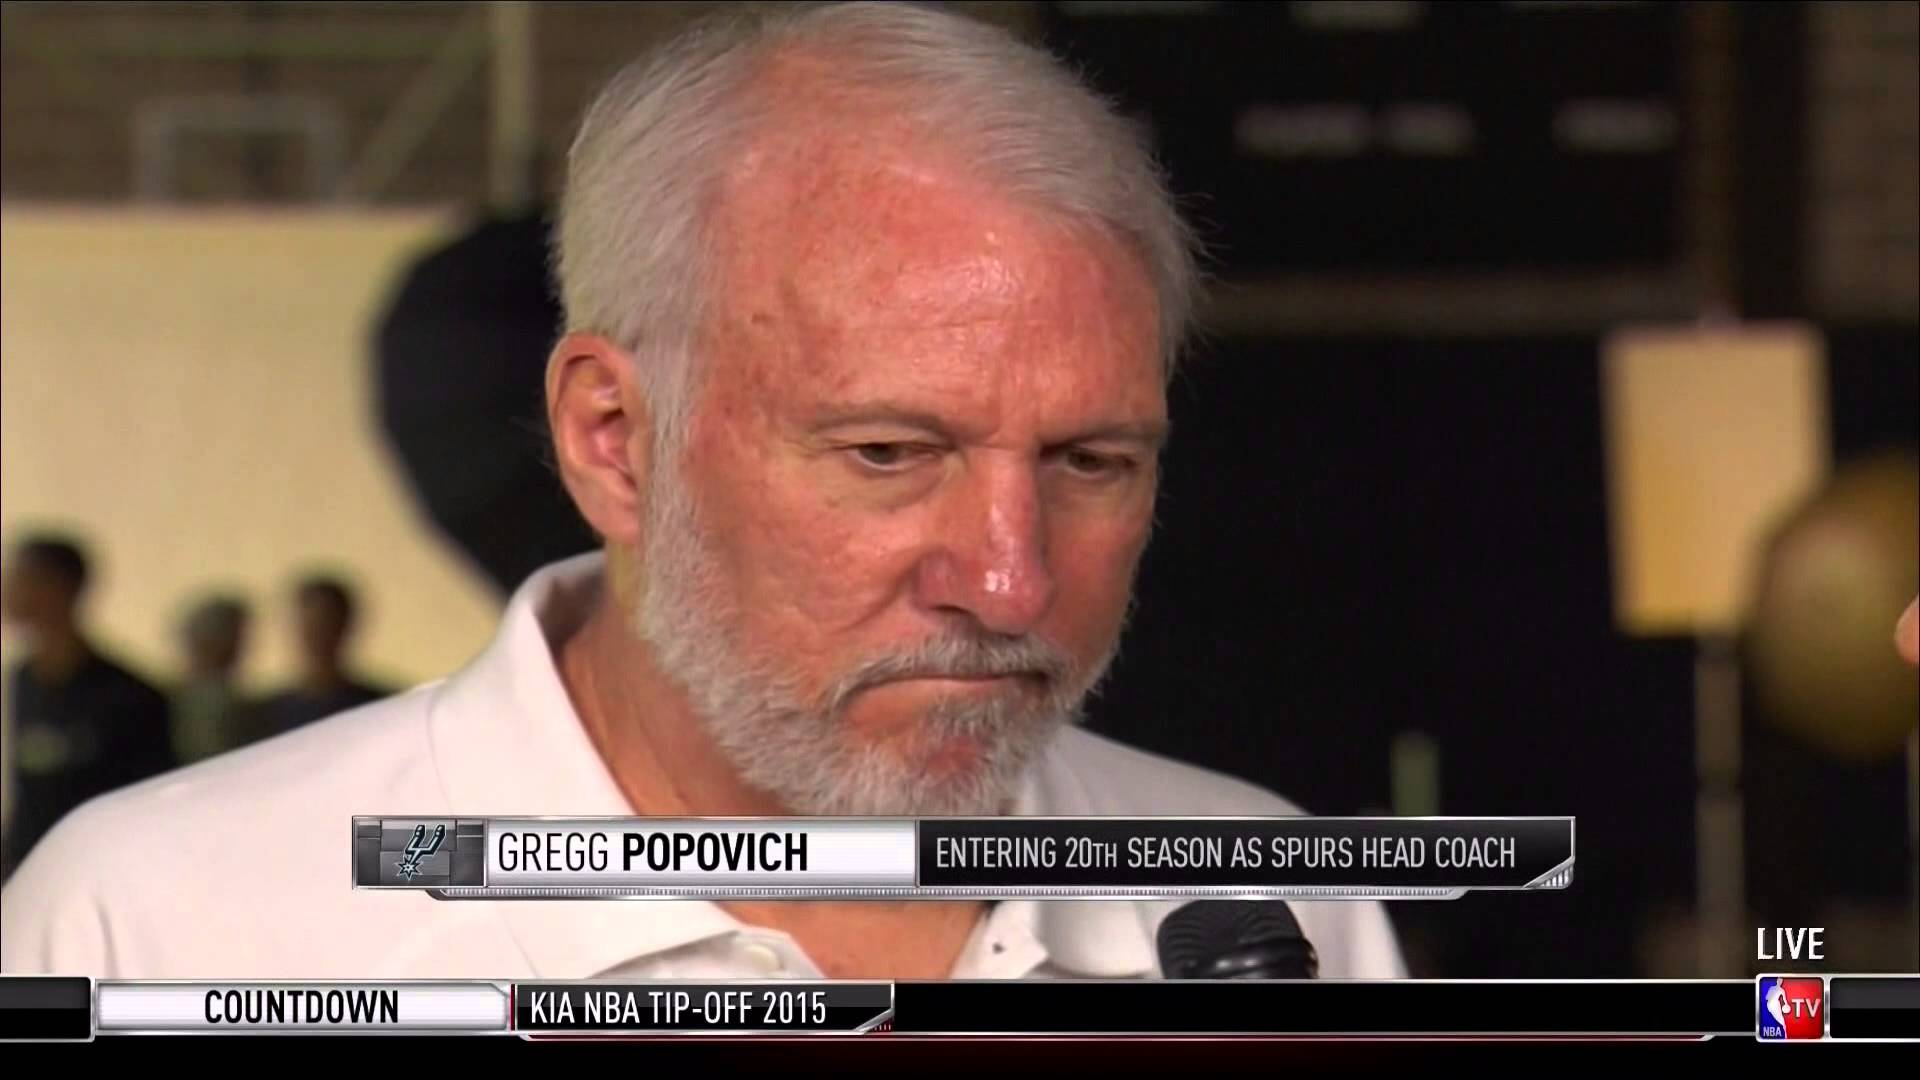 Gregg Popovich up to his old ways in hilarious 2015 media day interview